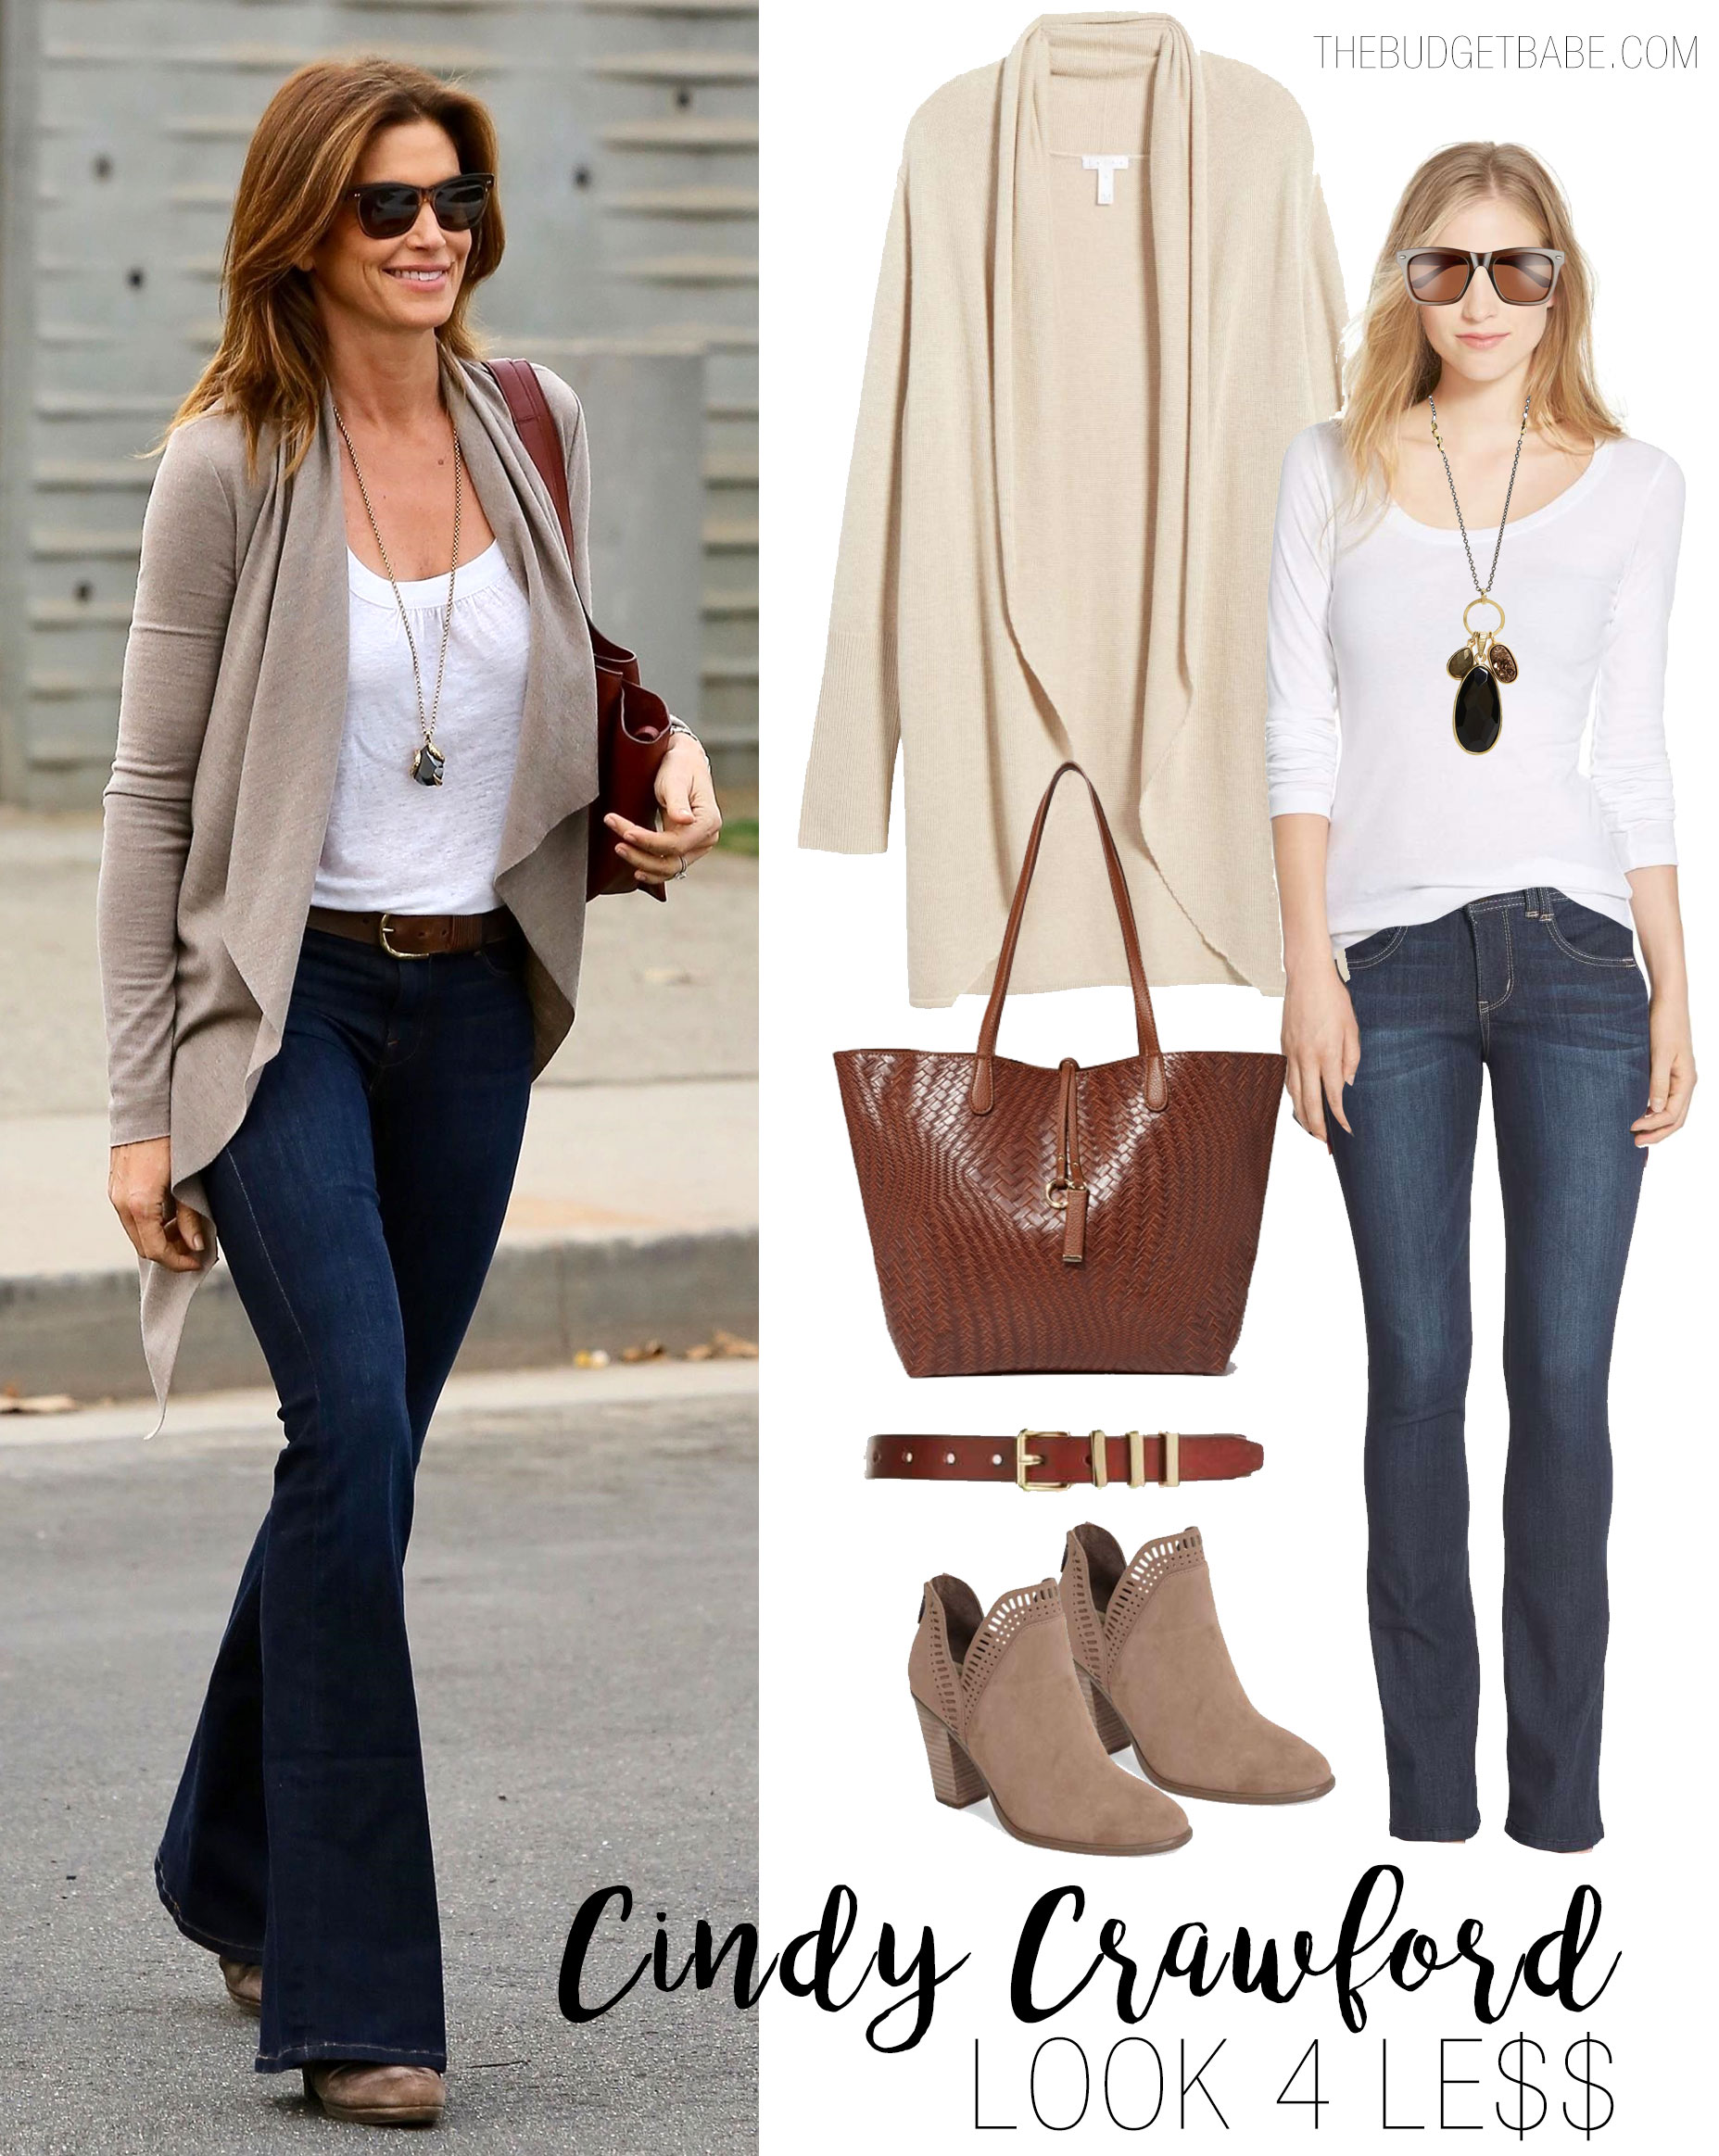 Cindy Crawford looks stylish in a beige cardigan and flare leg jeans while running errands in Santa Monica.